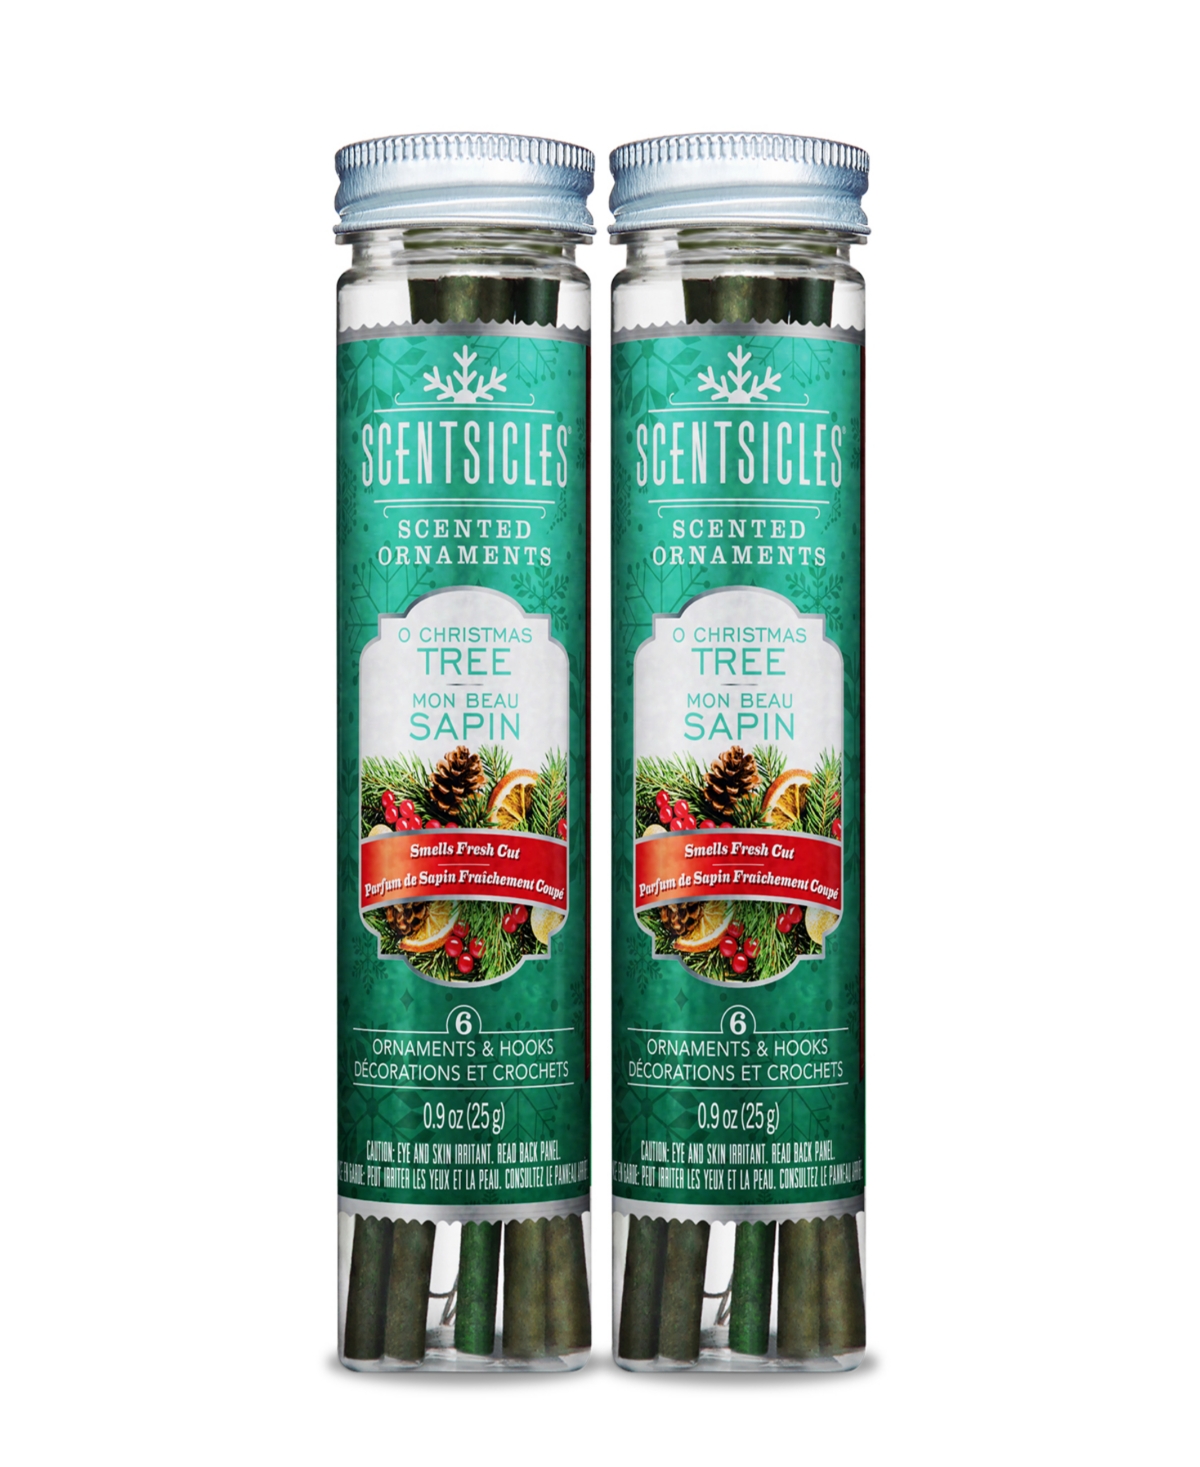 National Tree Company Scentsicles Scented Ornaments, 6 Count Bottles, Infused Paper Sticks, 2 Pack Set In O Christmas Tree